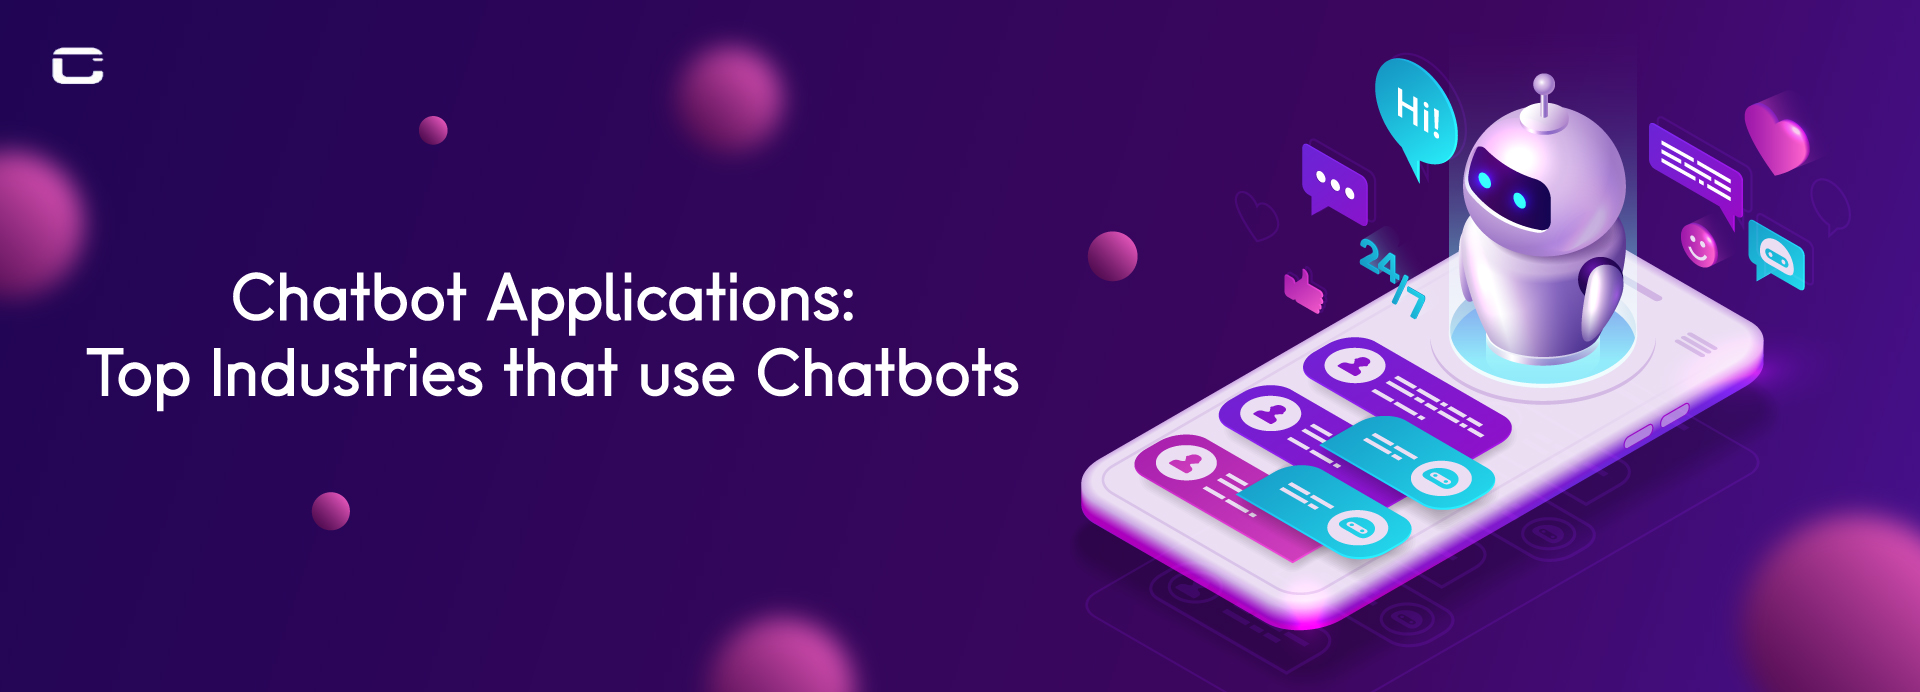 Chatbot Applications: Top Industries that use Chatbots